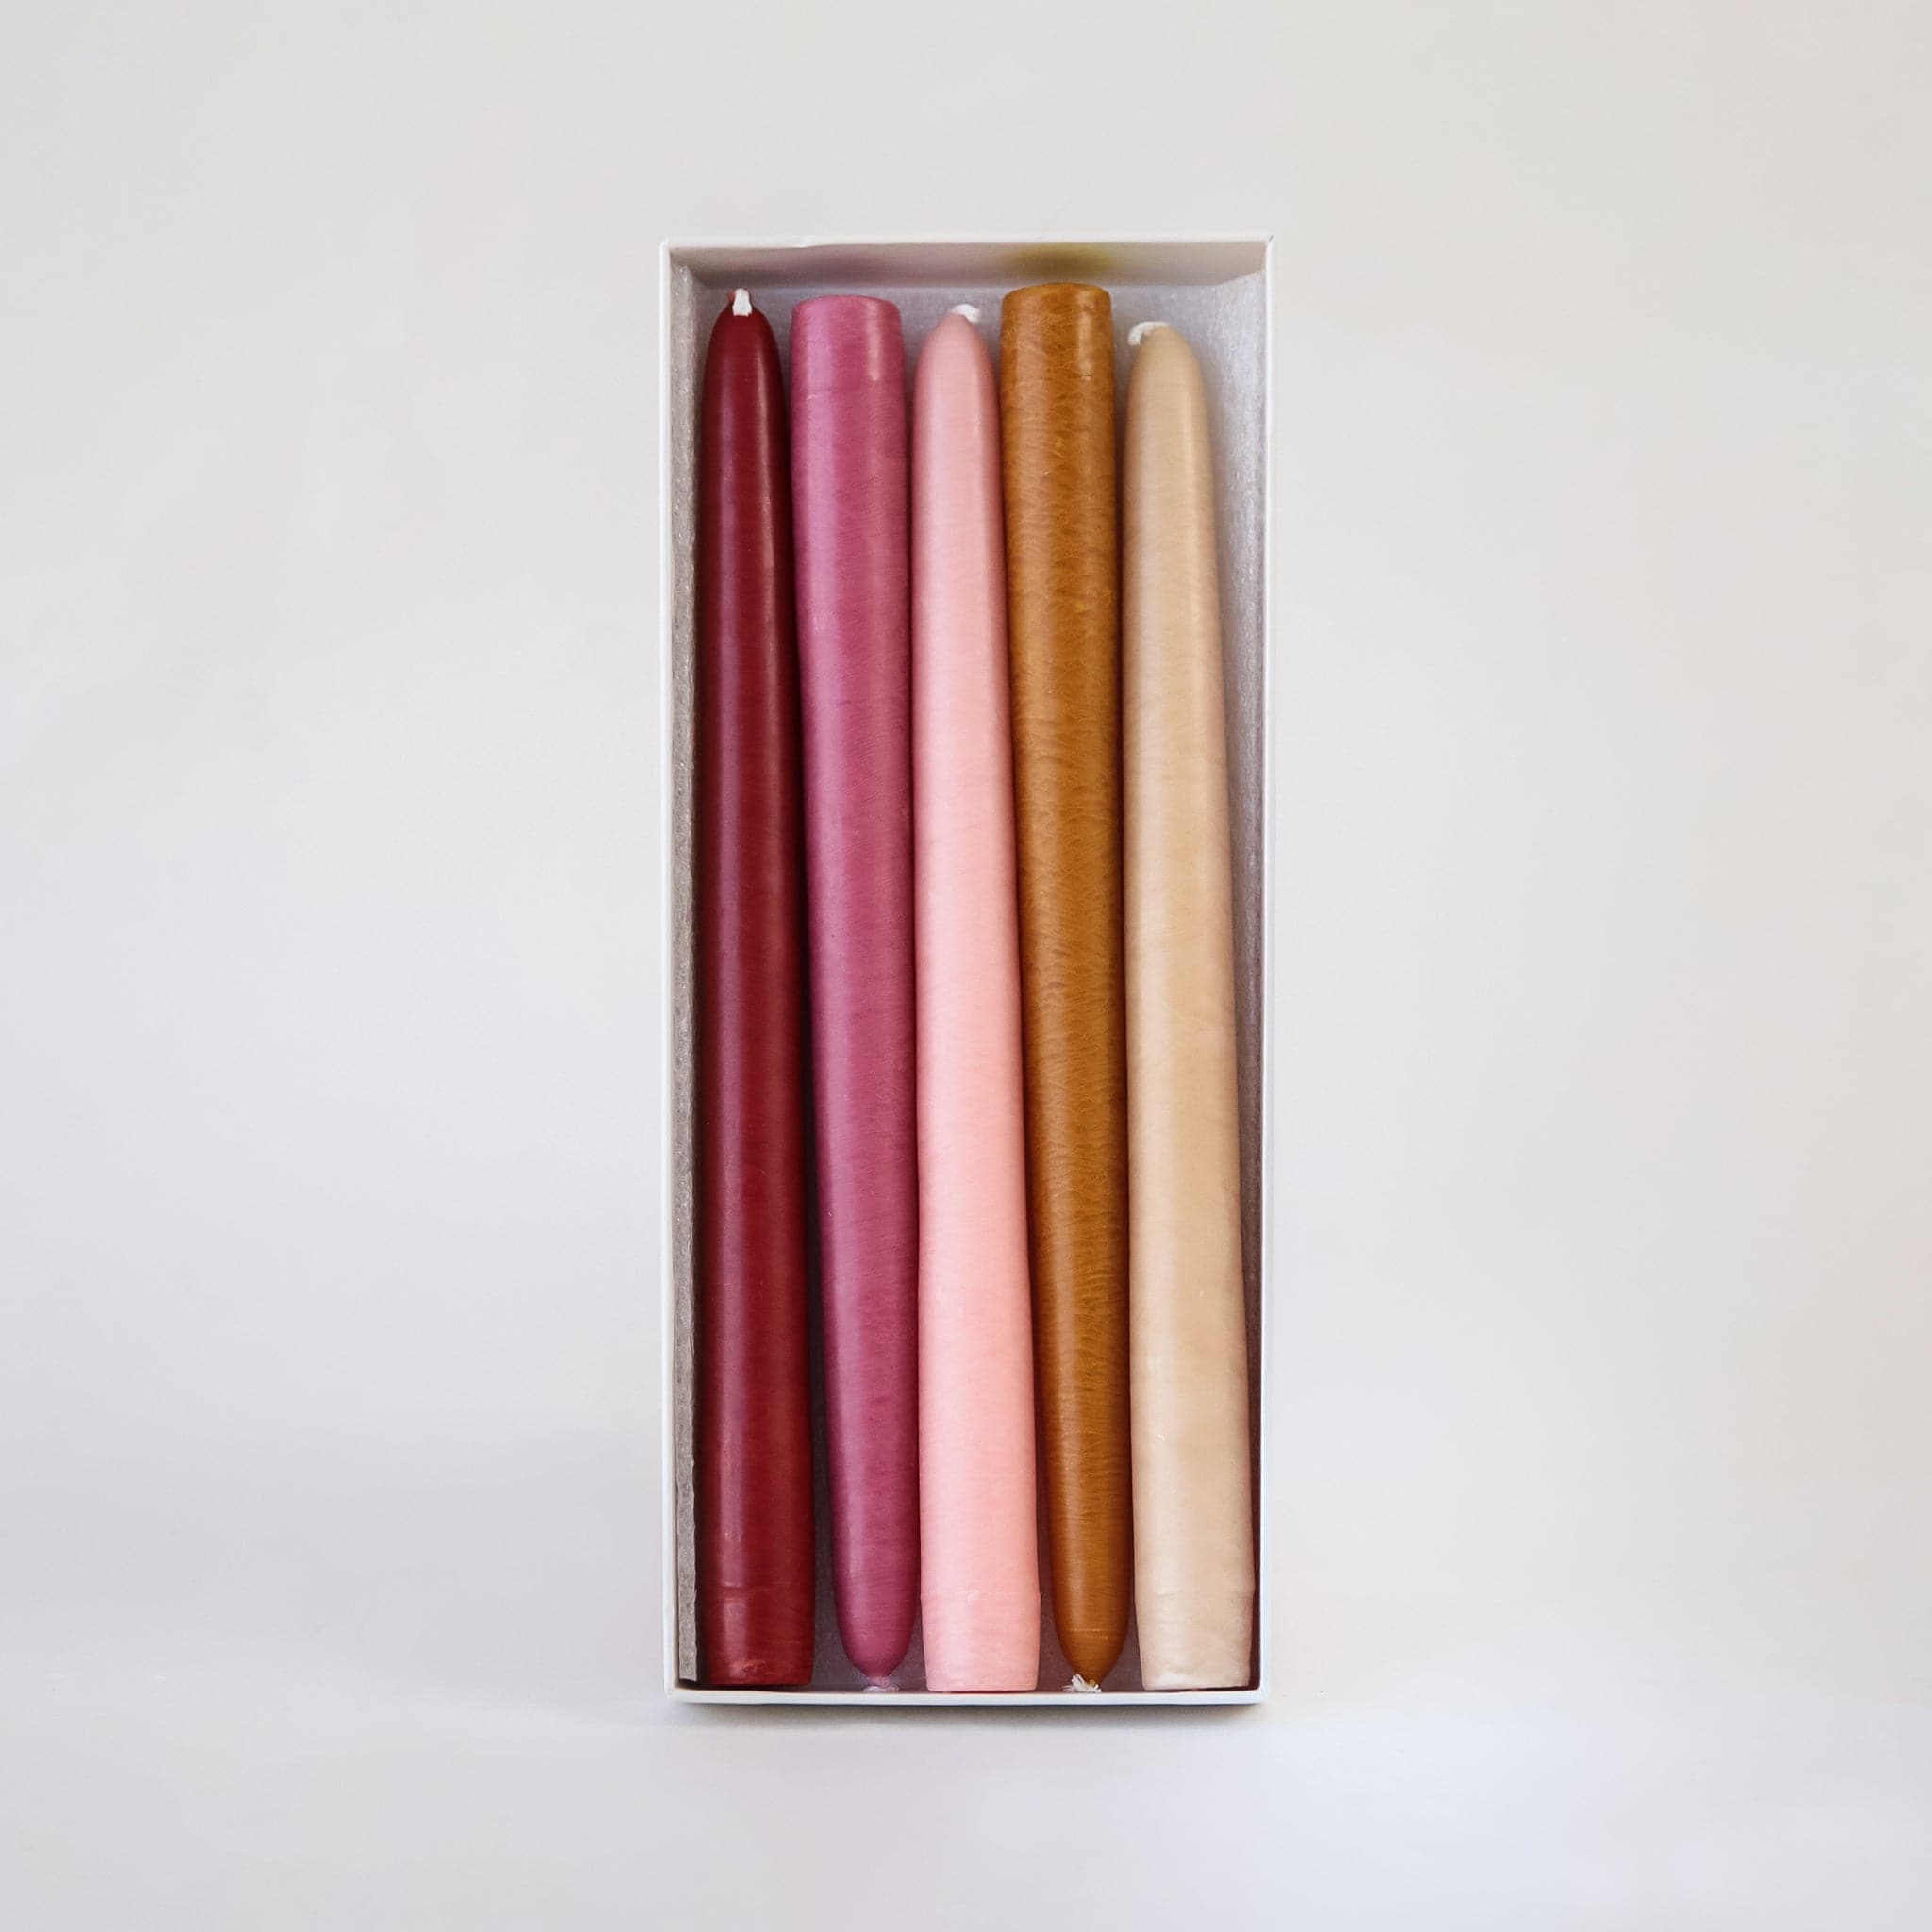 Set of five, 10 inch taper candles that come in warm toned red, pinks and oranges laying in white box against white background. 